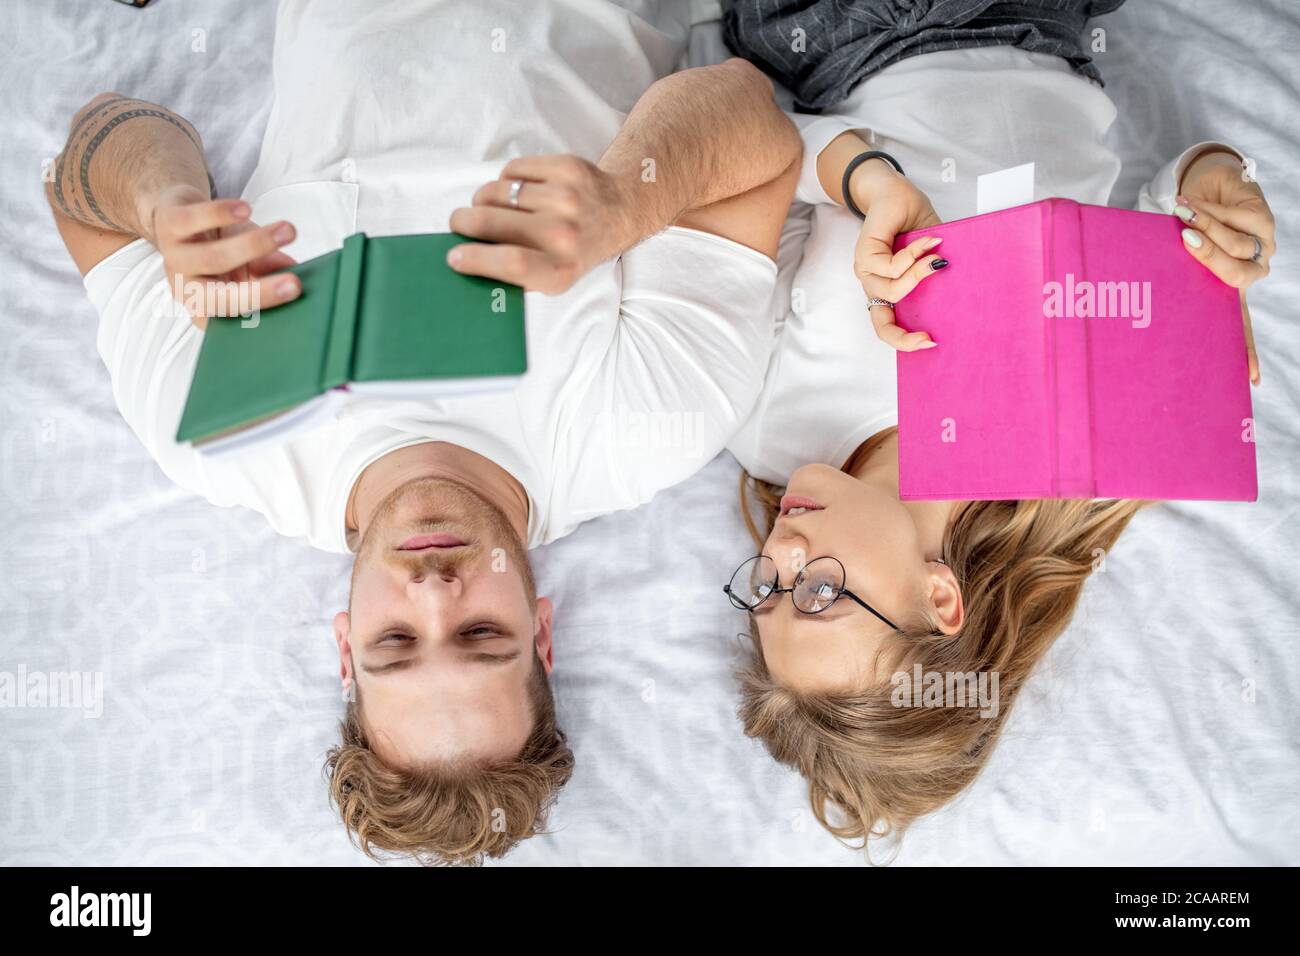 education, learning, studing concept. top view photo.bookworms. top view shot. Stock Photo